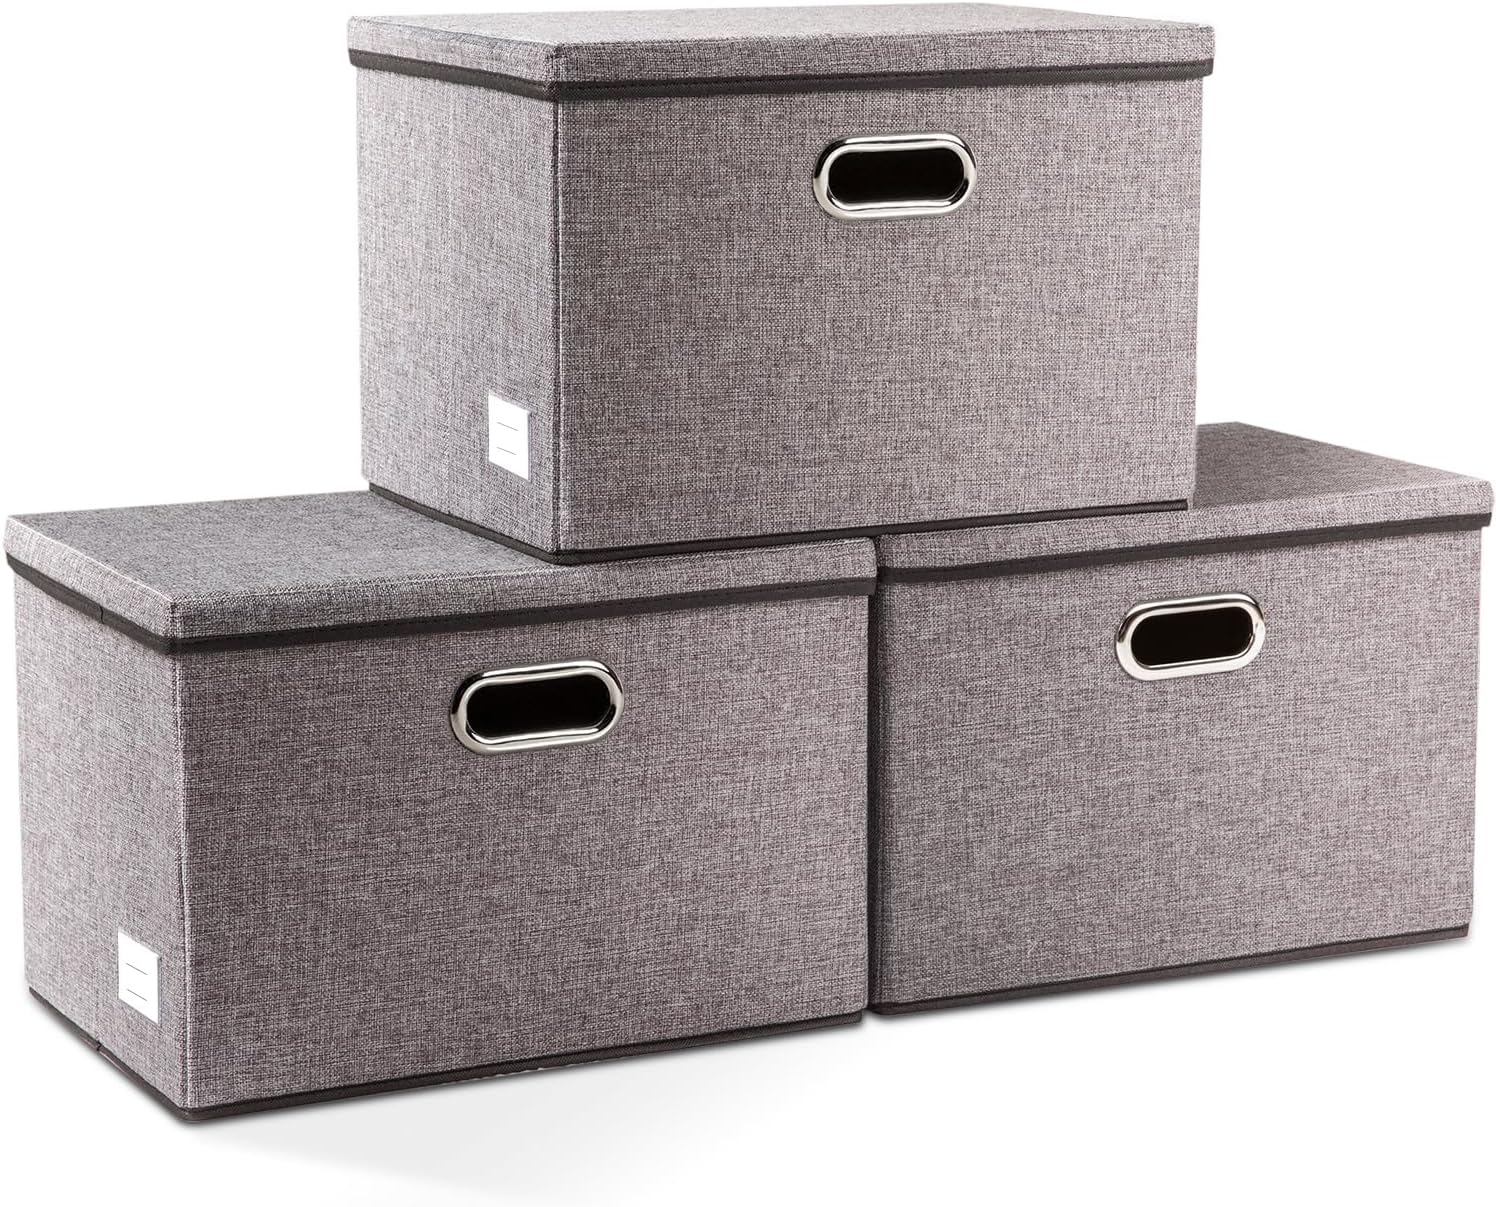 PRANDOM Large Collapsible Storage Bins with Lids [3-Pack] Linen Fabric Foldable Storage Boxes Organizer Containers Organization Baskets Cube Decorative for Bedroom Closet Clothes (17.7x11.8x11.8)